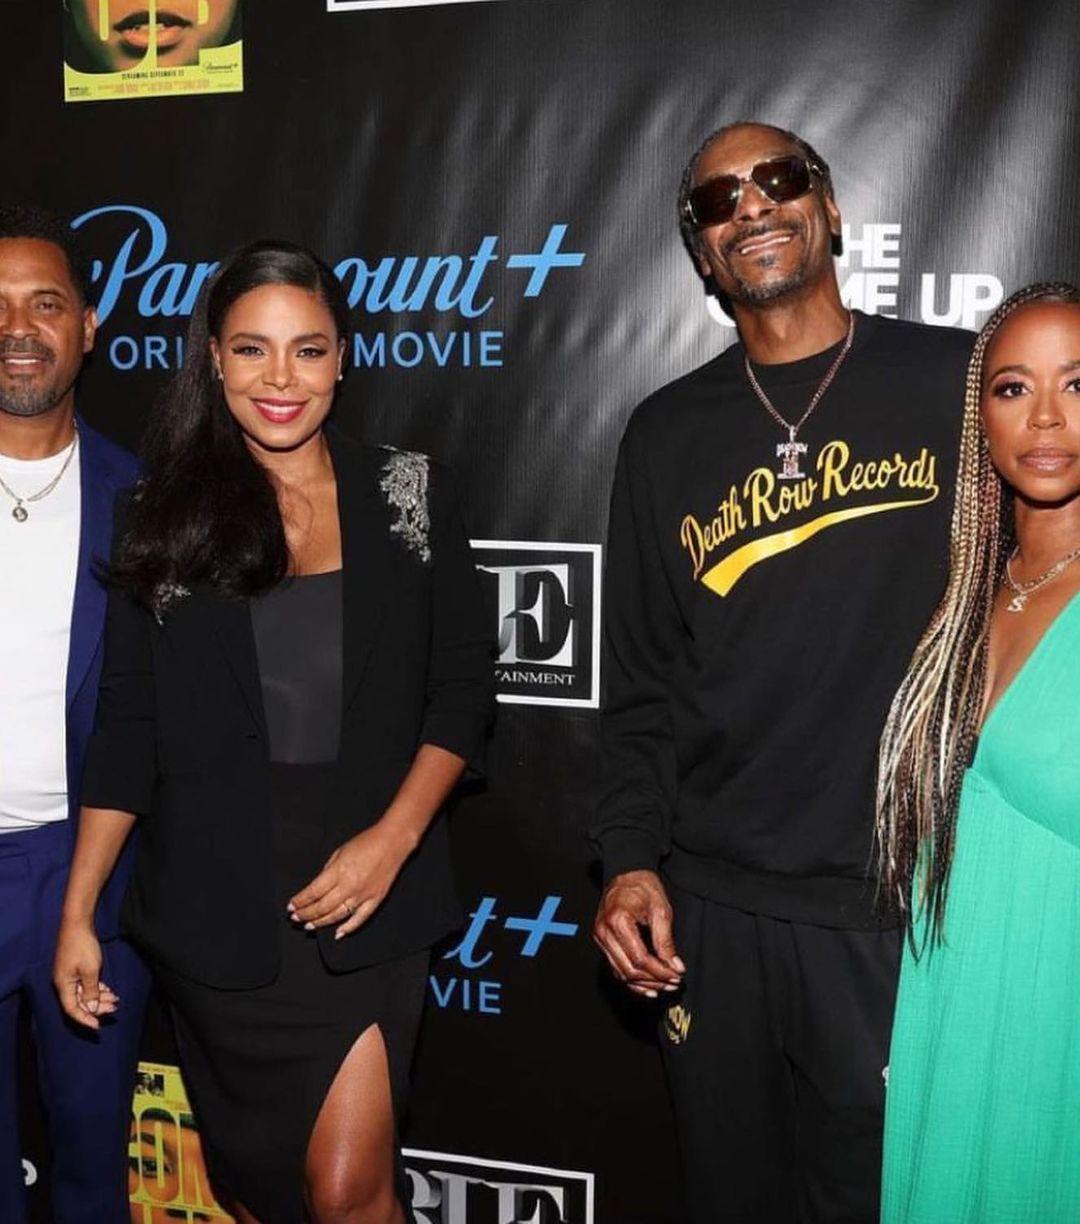 Snoop Dogg skipped BET to attended Mike Epps' Wedding